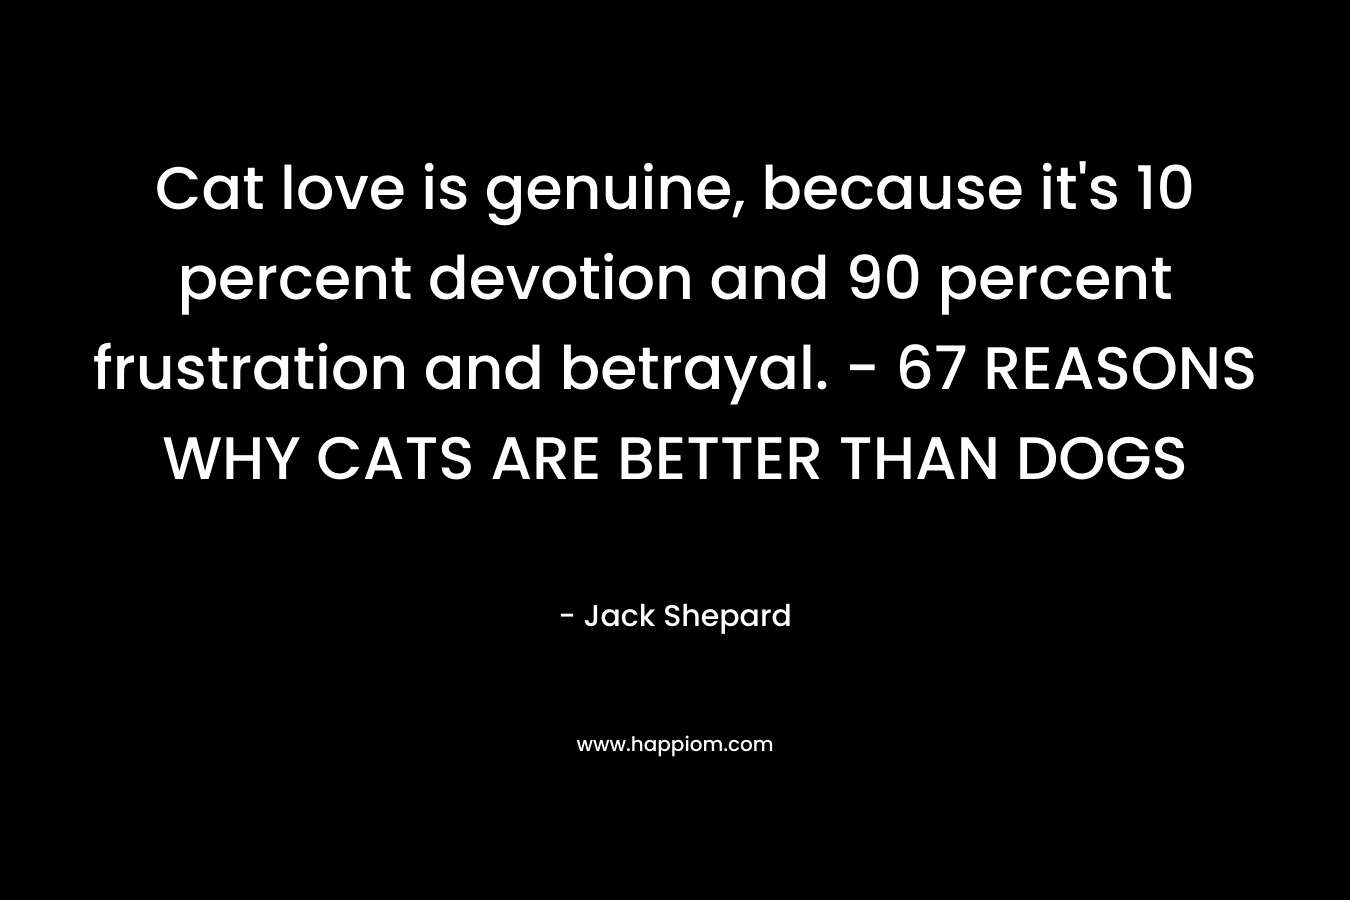 Cat love is genuine, because it's 10 percent devotion and 90 percent frustration and betrayal. - 67 REASONS WHY CATS ARE BETTER THAN DOGS